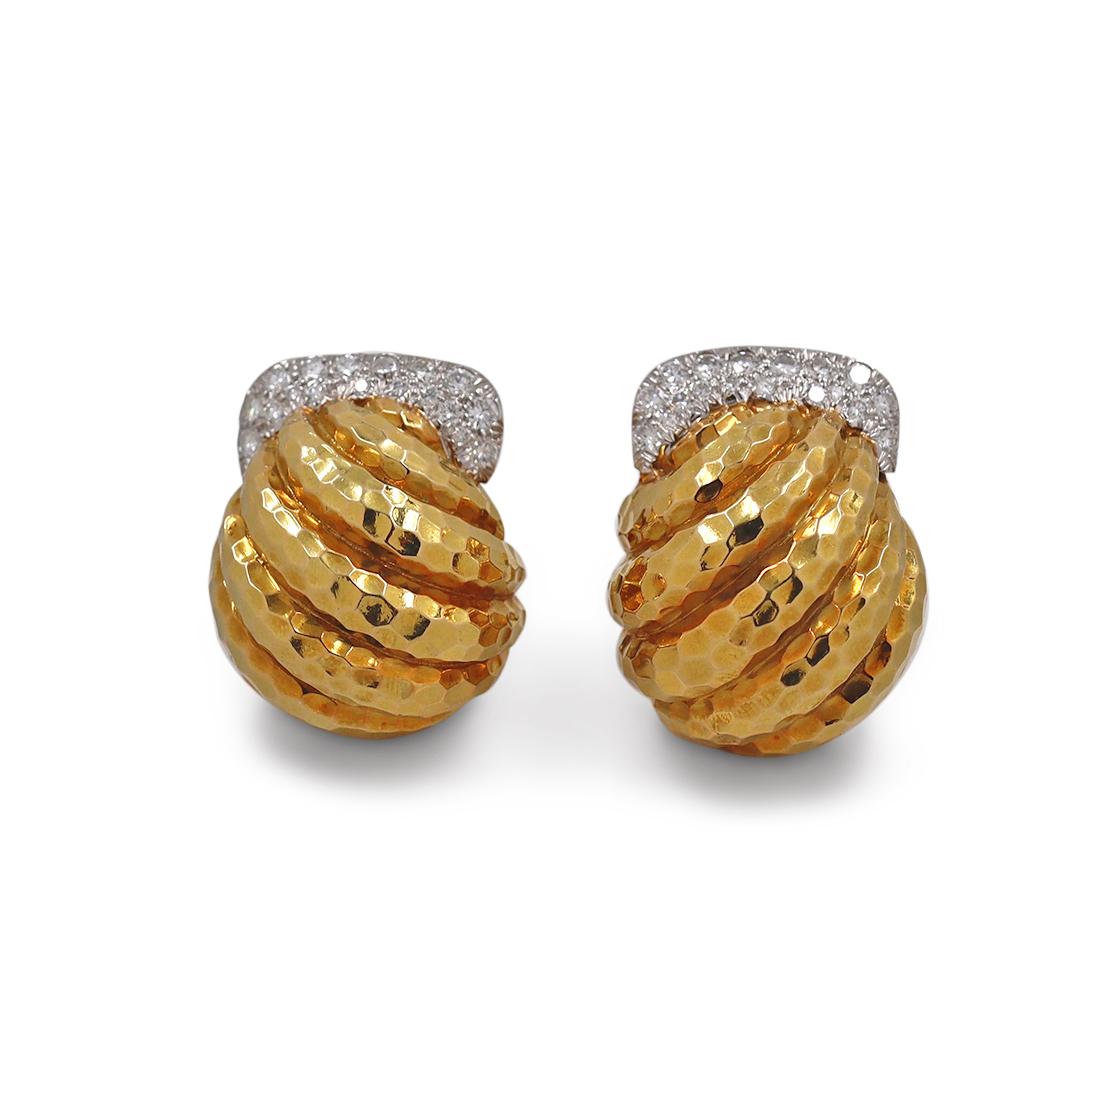 Authentic David Webb ear clips crafted in 18 karat yellow gold and platinum. Each earring is set across the top with sparkling round brilliant cut diamonds of an estimated 1.48 total carats for the pair. The hammered gold is artfully arranged in a